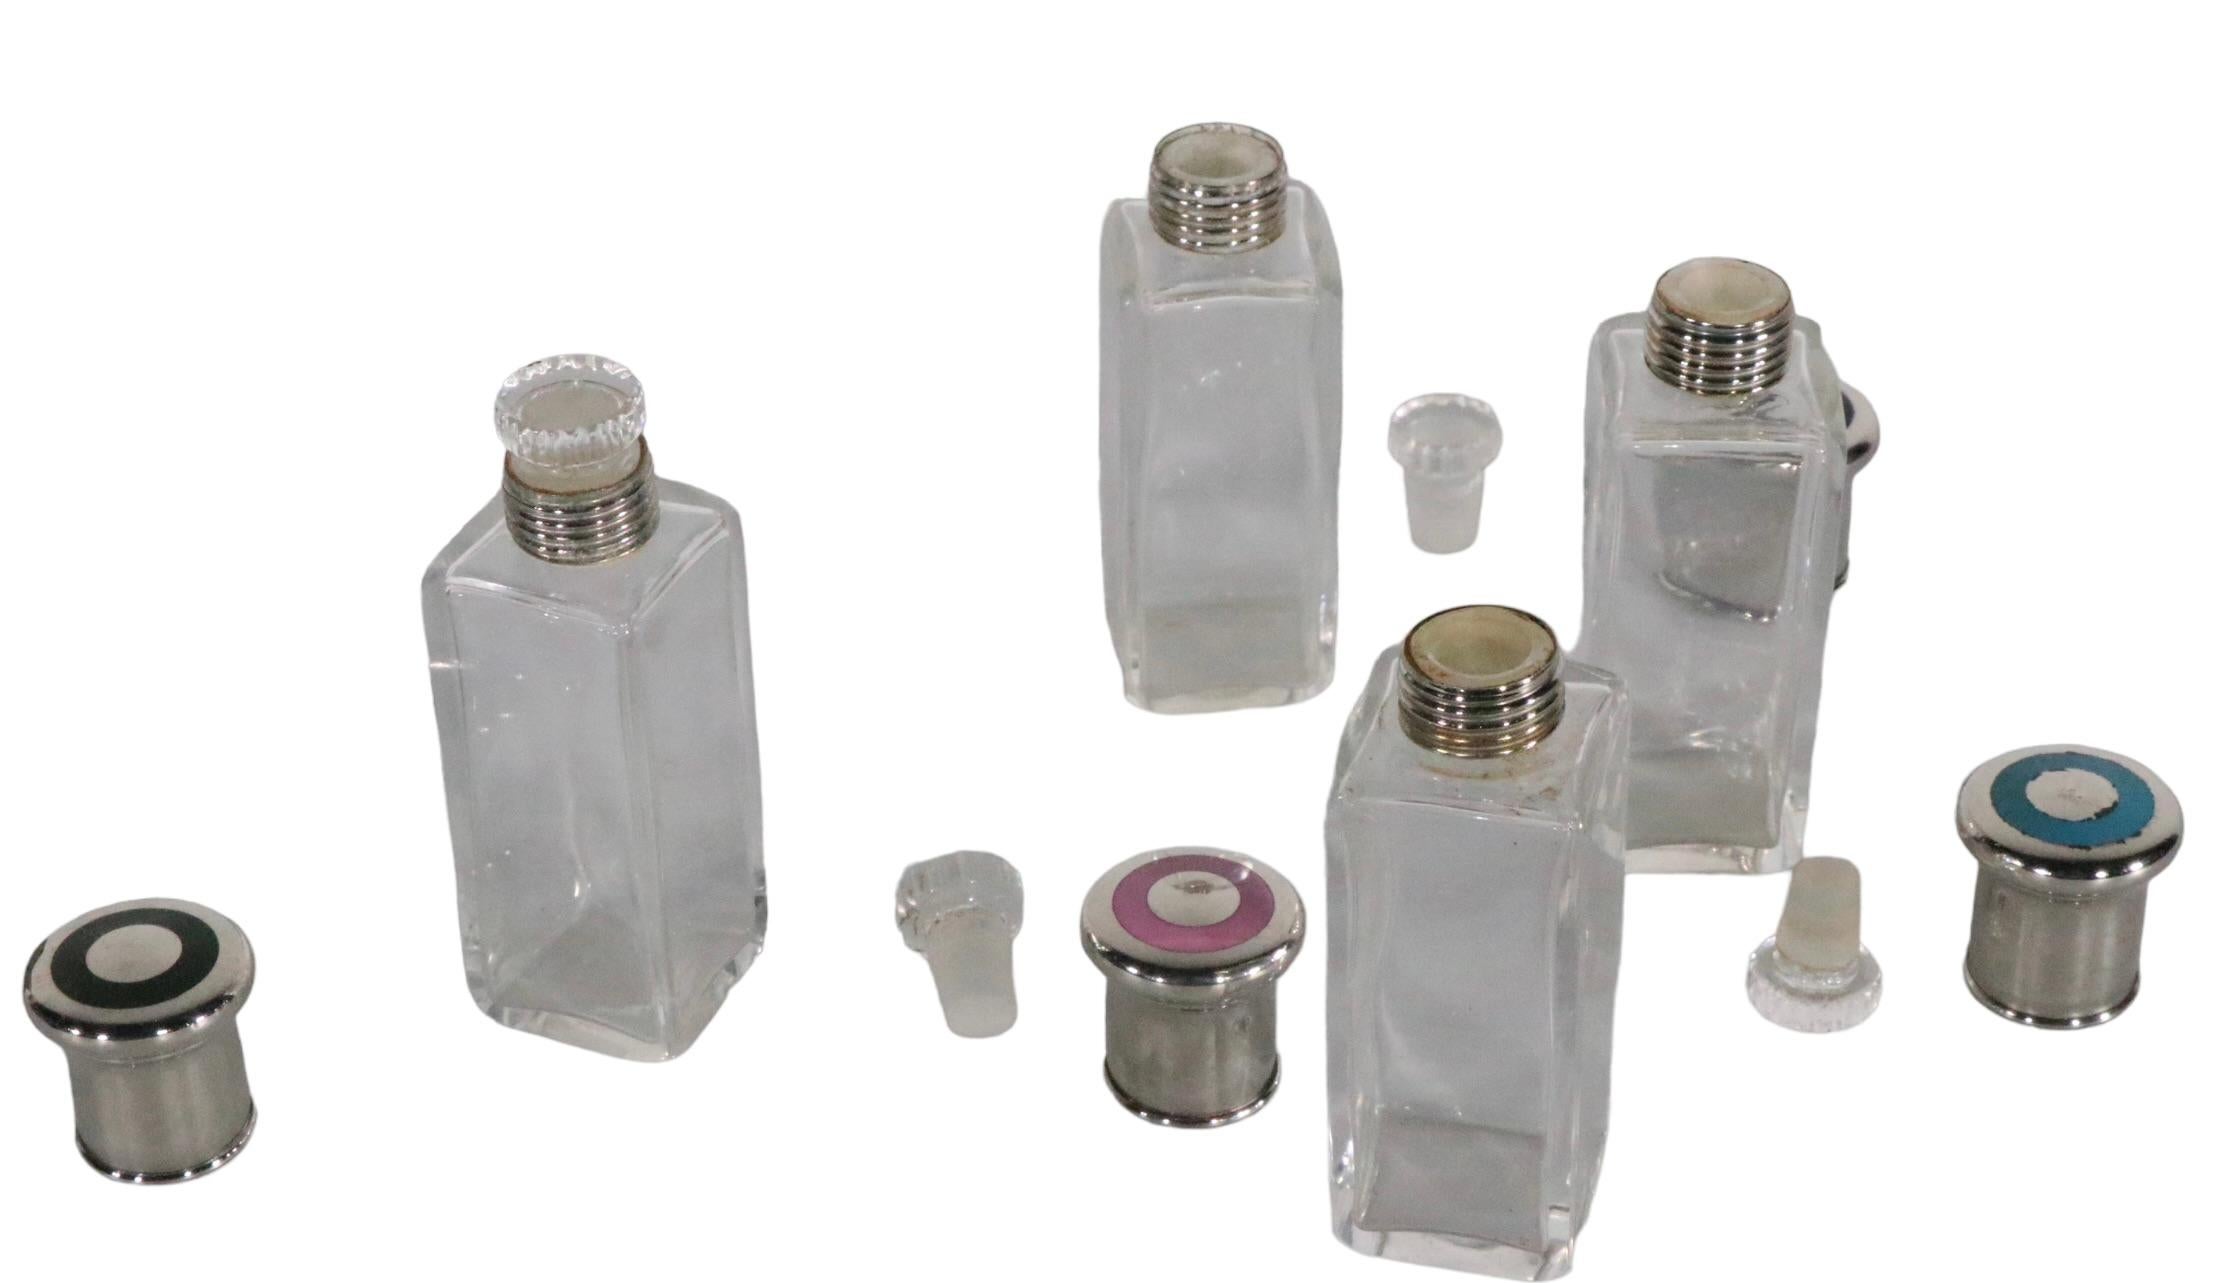 Mid-20th Century Art Deco Travel Toilet Water Perfume Bottle Caddy with Original Bottles c 1930s For Sale